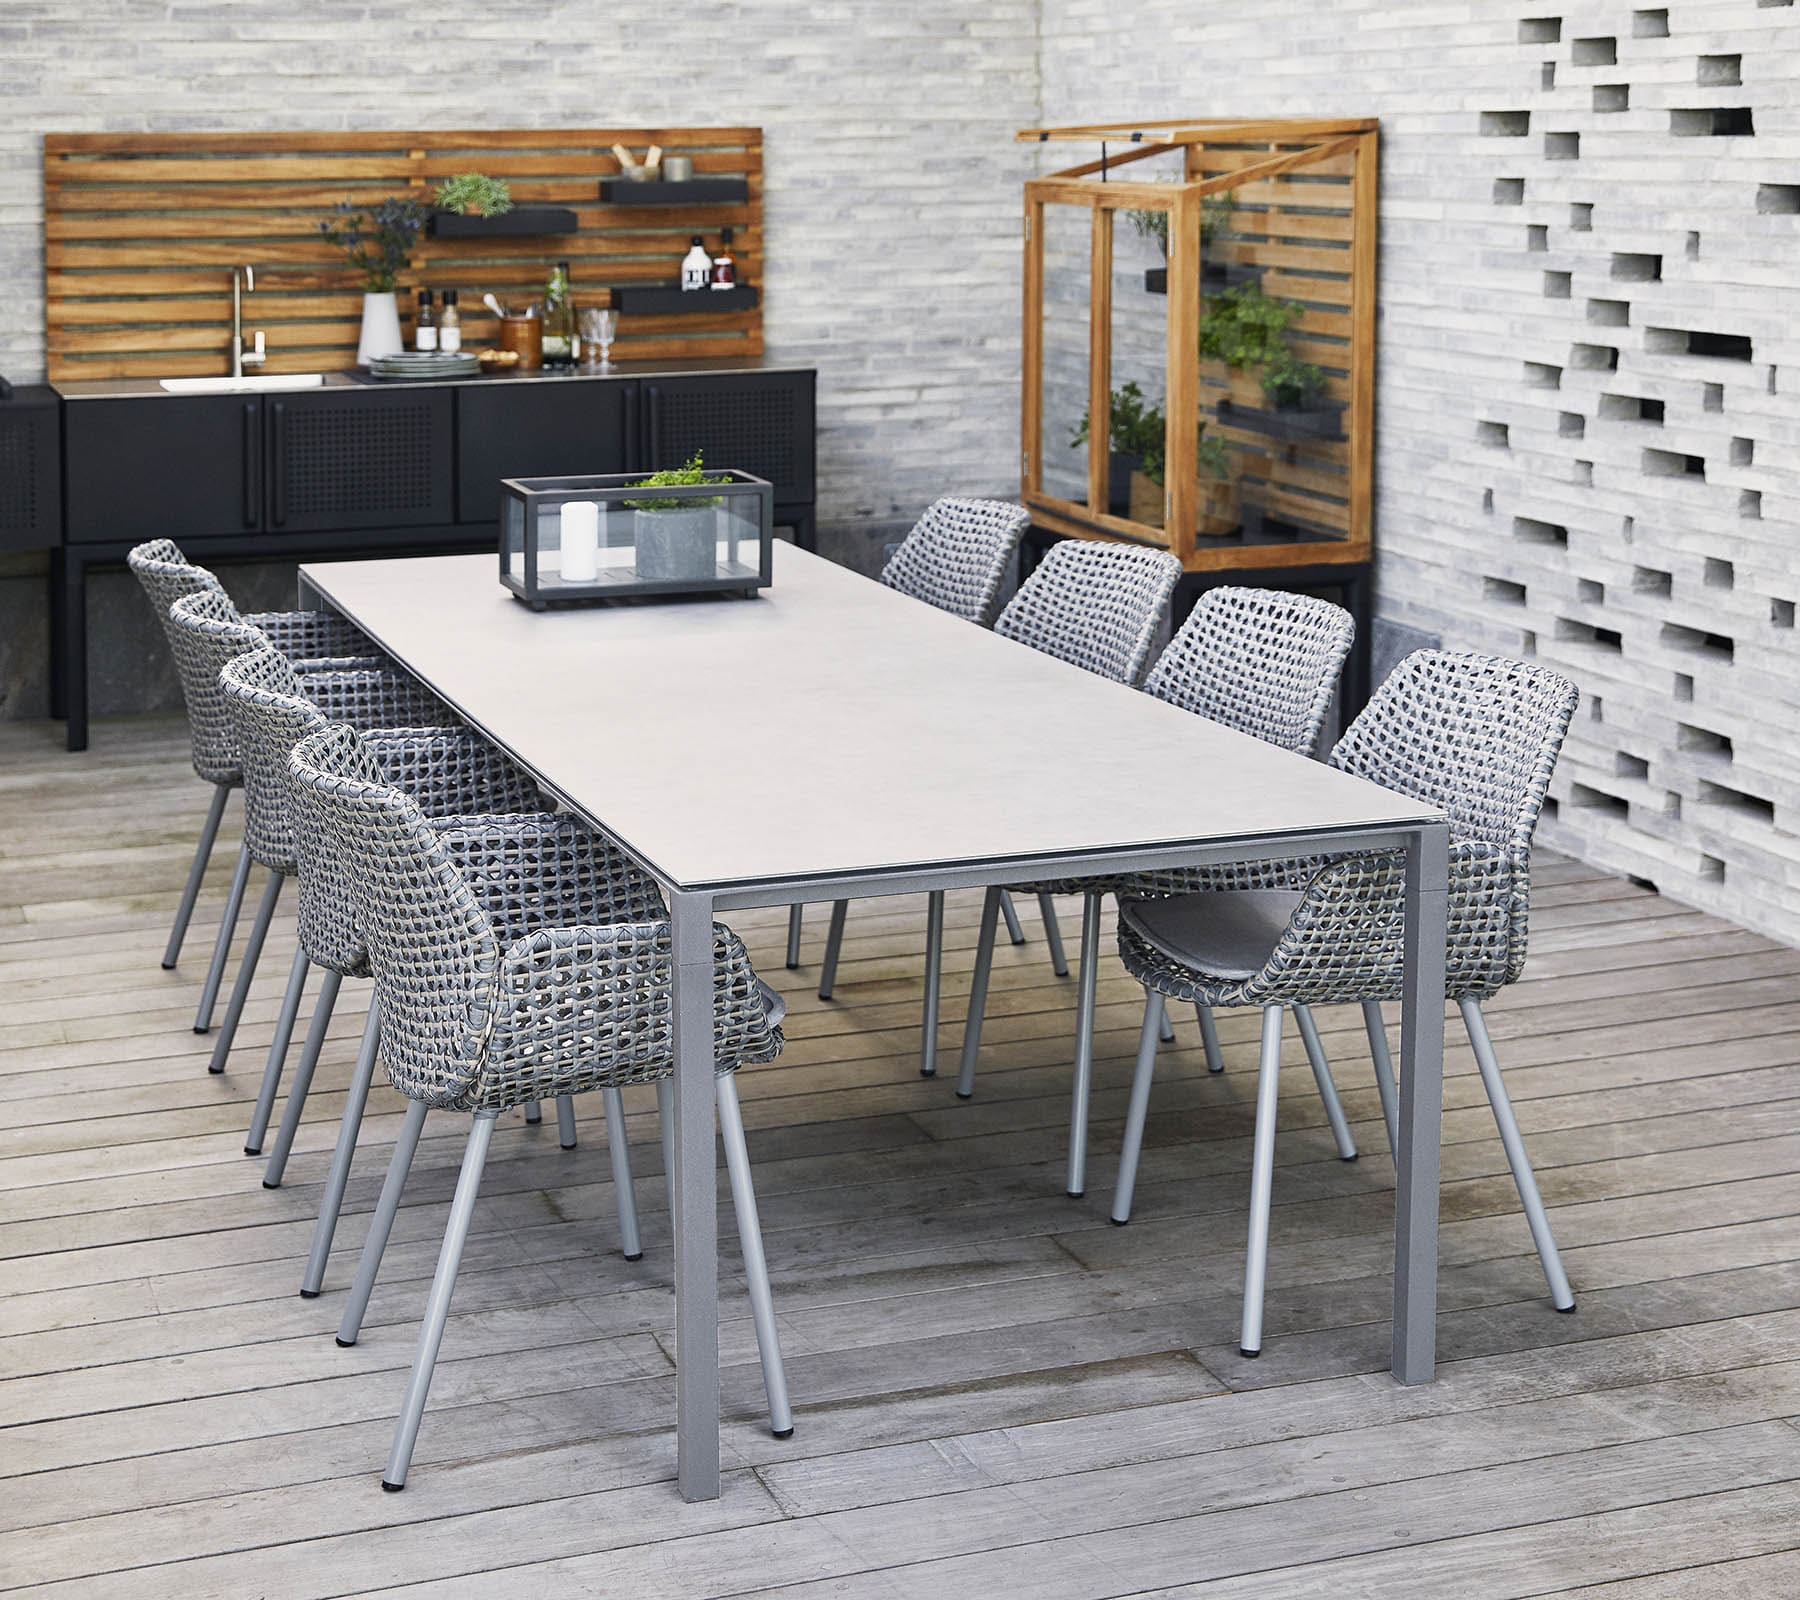 Boxhill's Pure light grey aluminum outdoor dining table with light grey outdoor dining chairs set on modern outdoor dining area